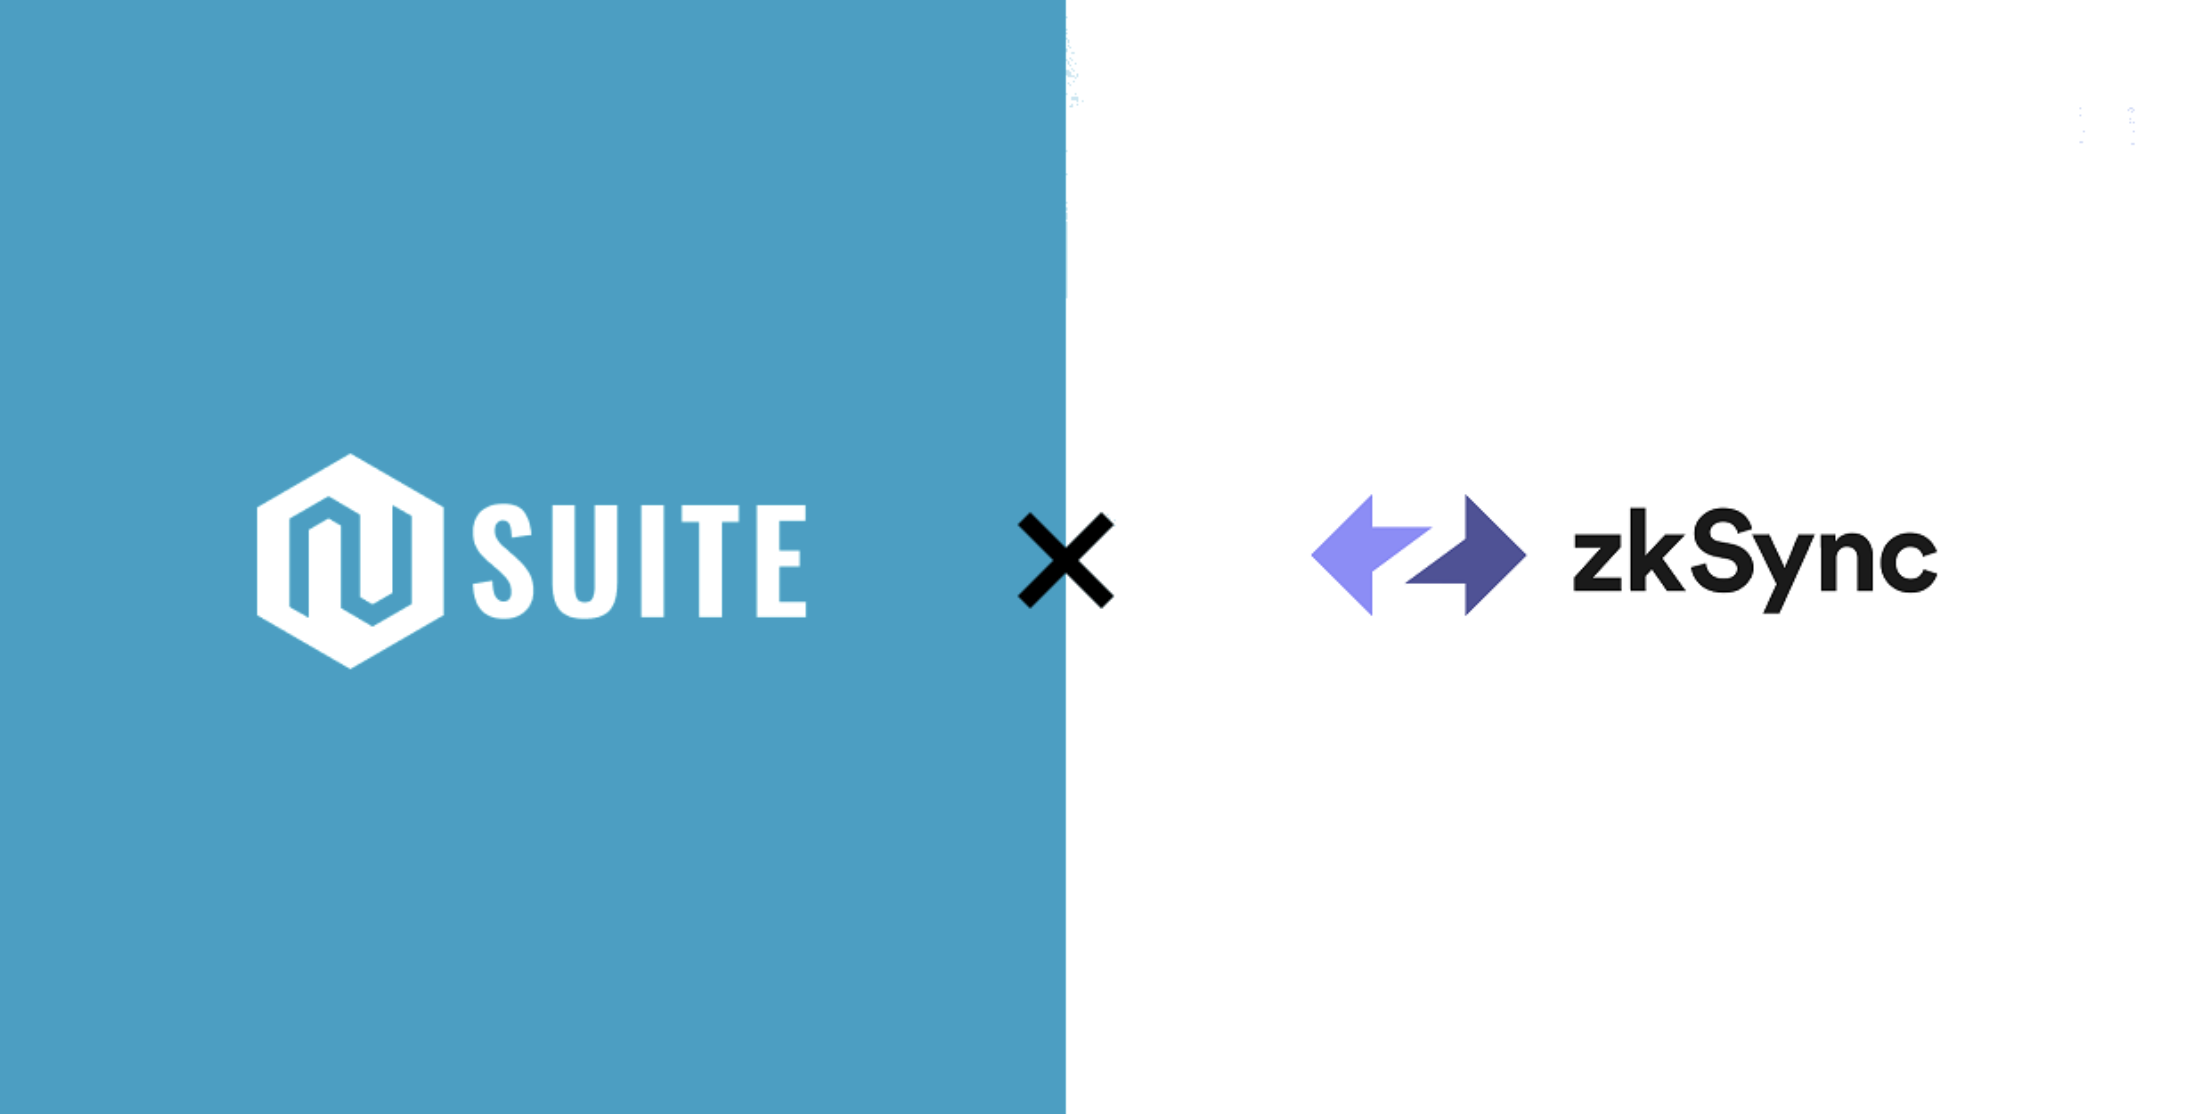 N Suite to Collaborate with zkSync to Offer Secure Private Key Management